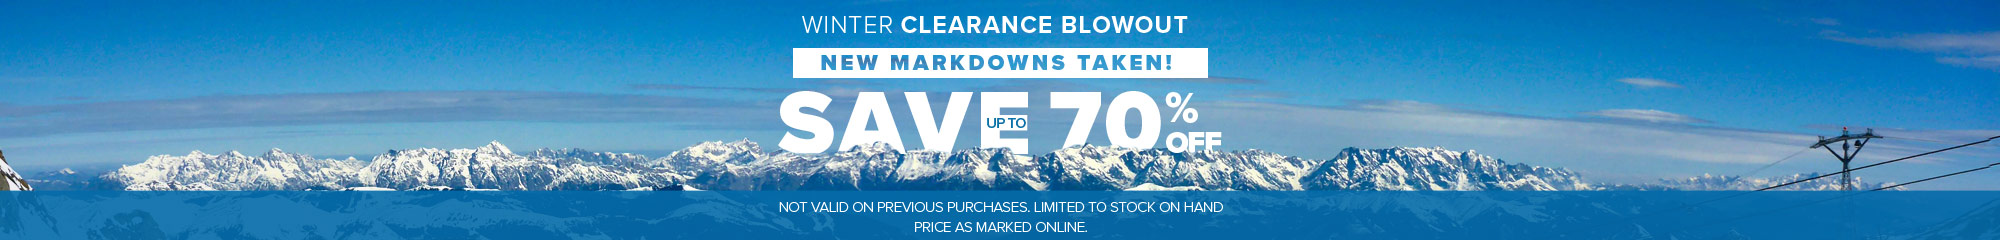 Winter Clearance Blowout. New Markdowns Taken Save up to 70%. 